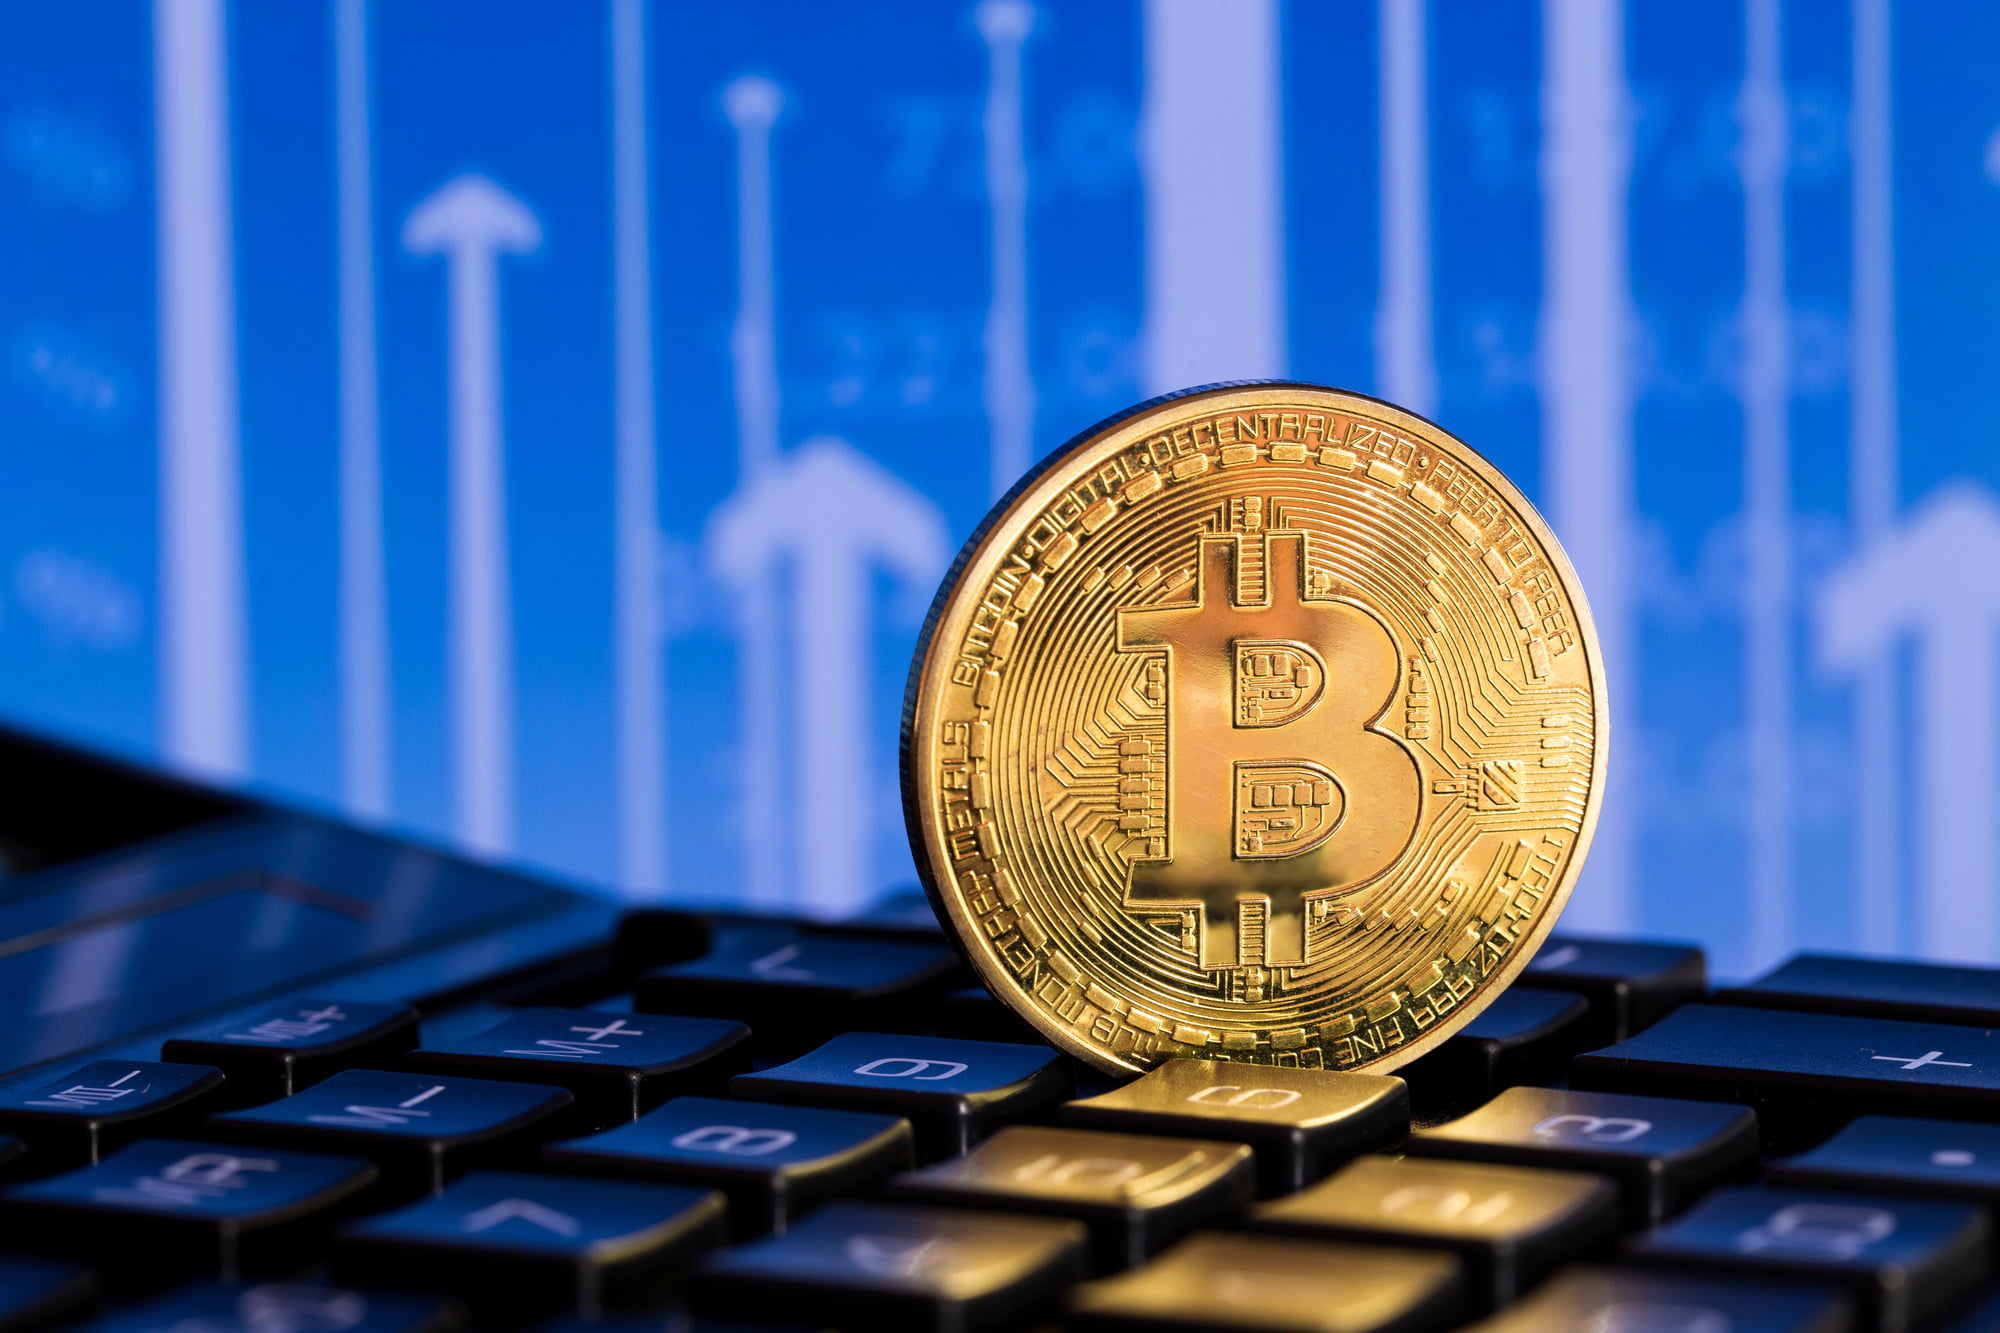 Have you ever been interested in the cryptocurrency vs digital currency debate? Do you understand the difference between the two? Read on to find out.